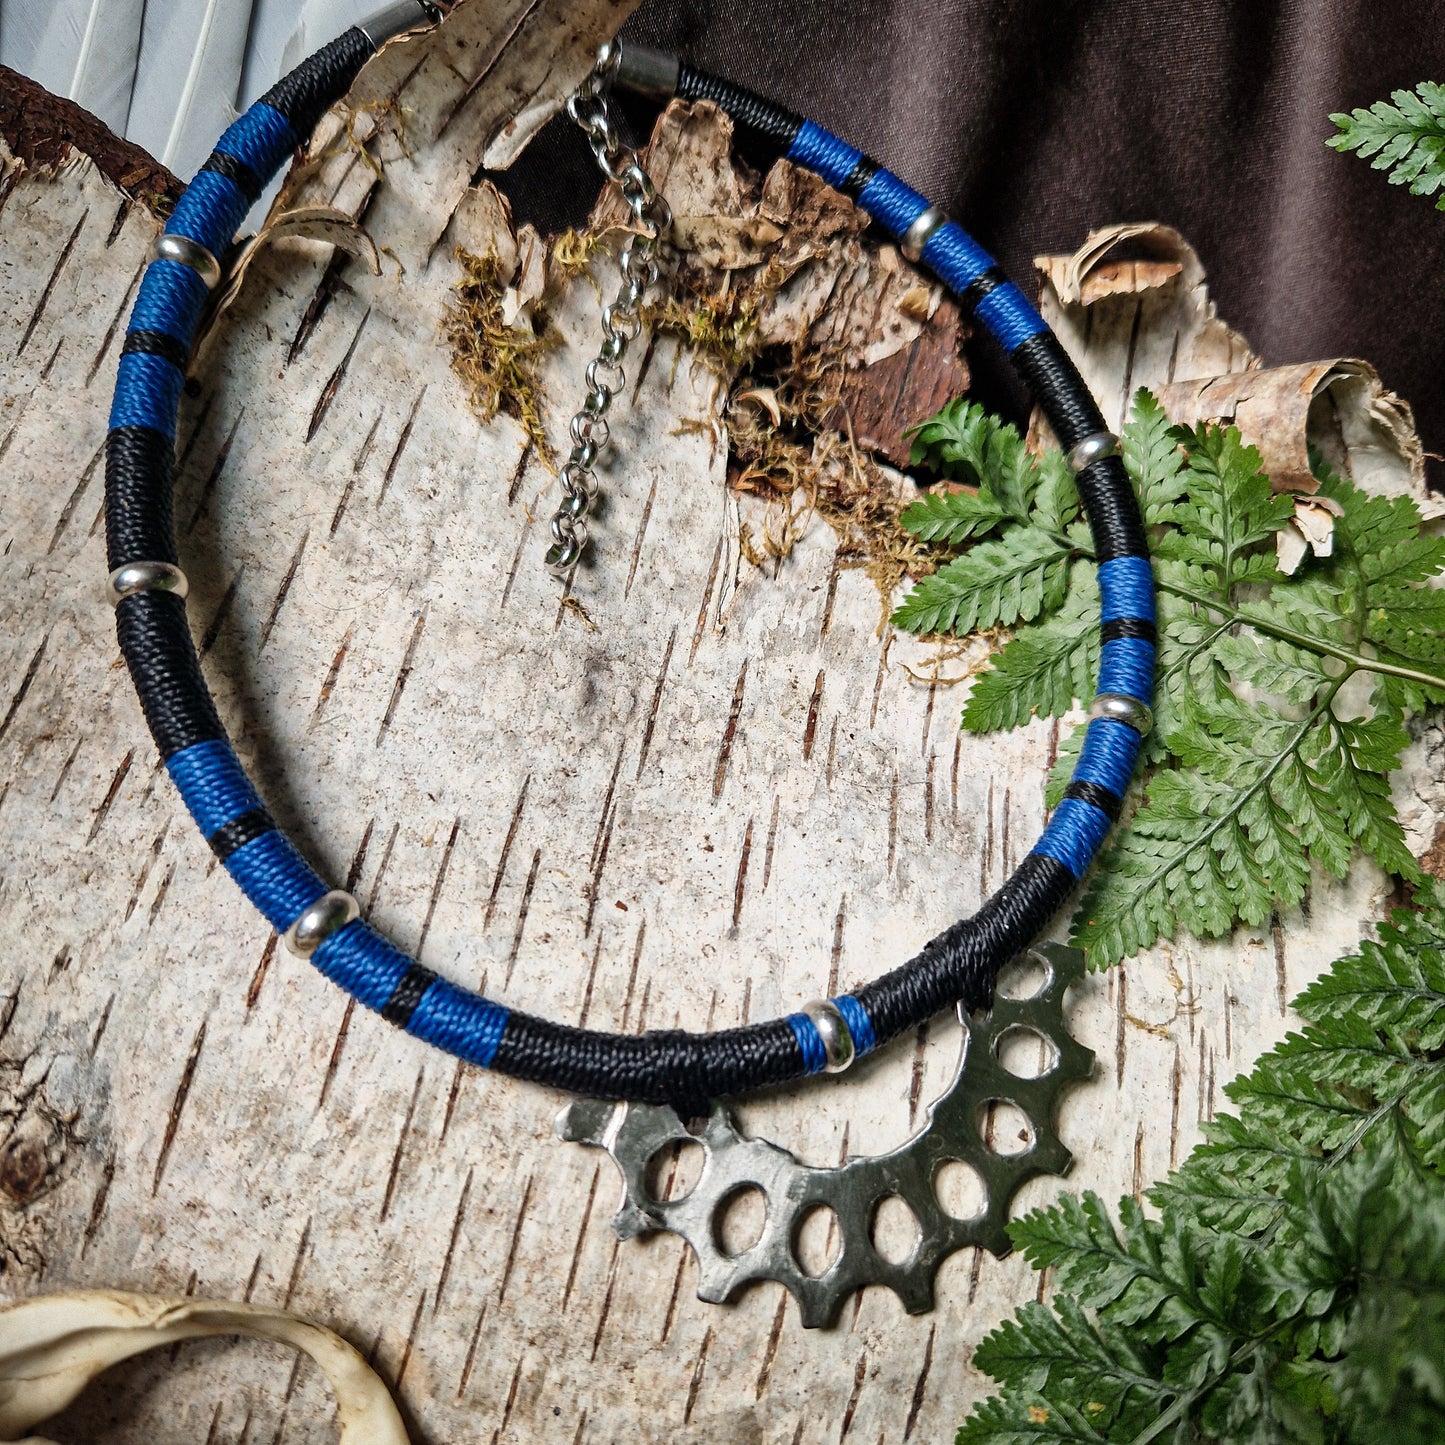 Blue and black gear necklace